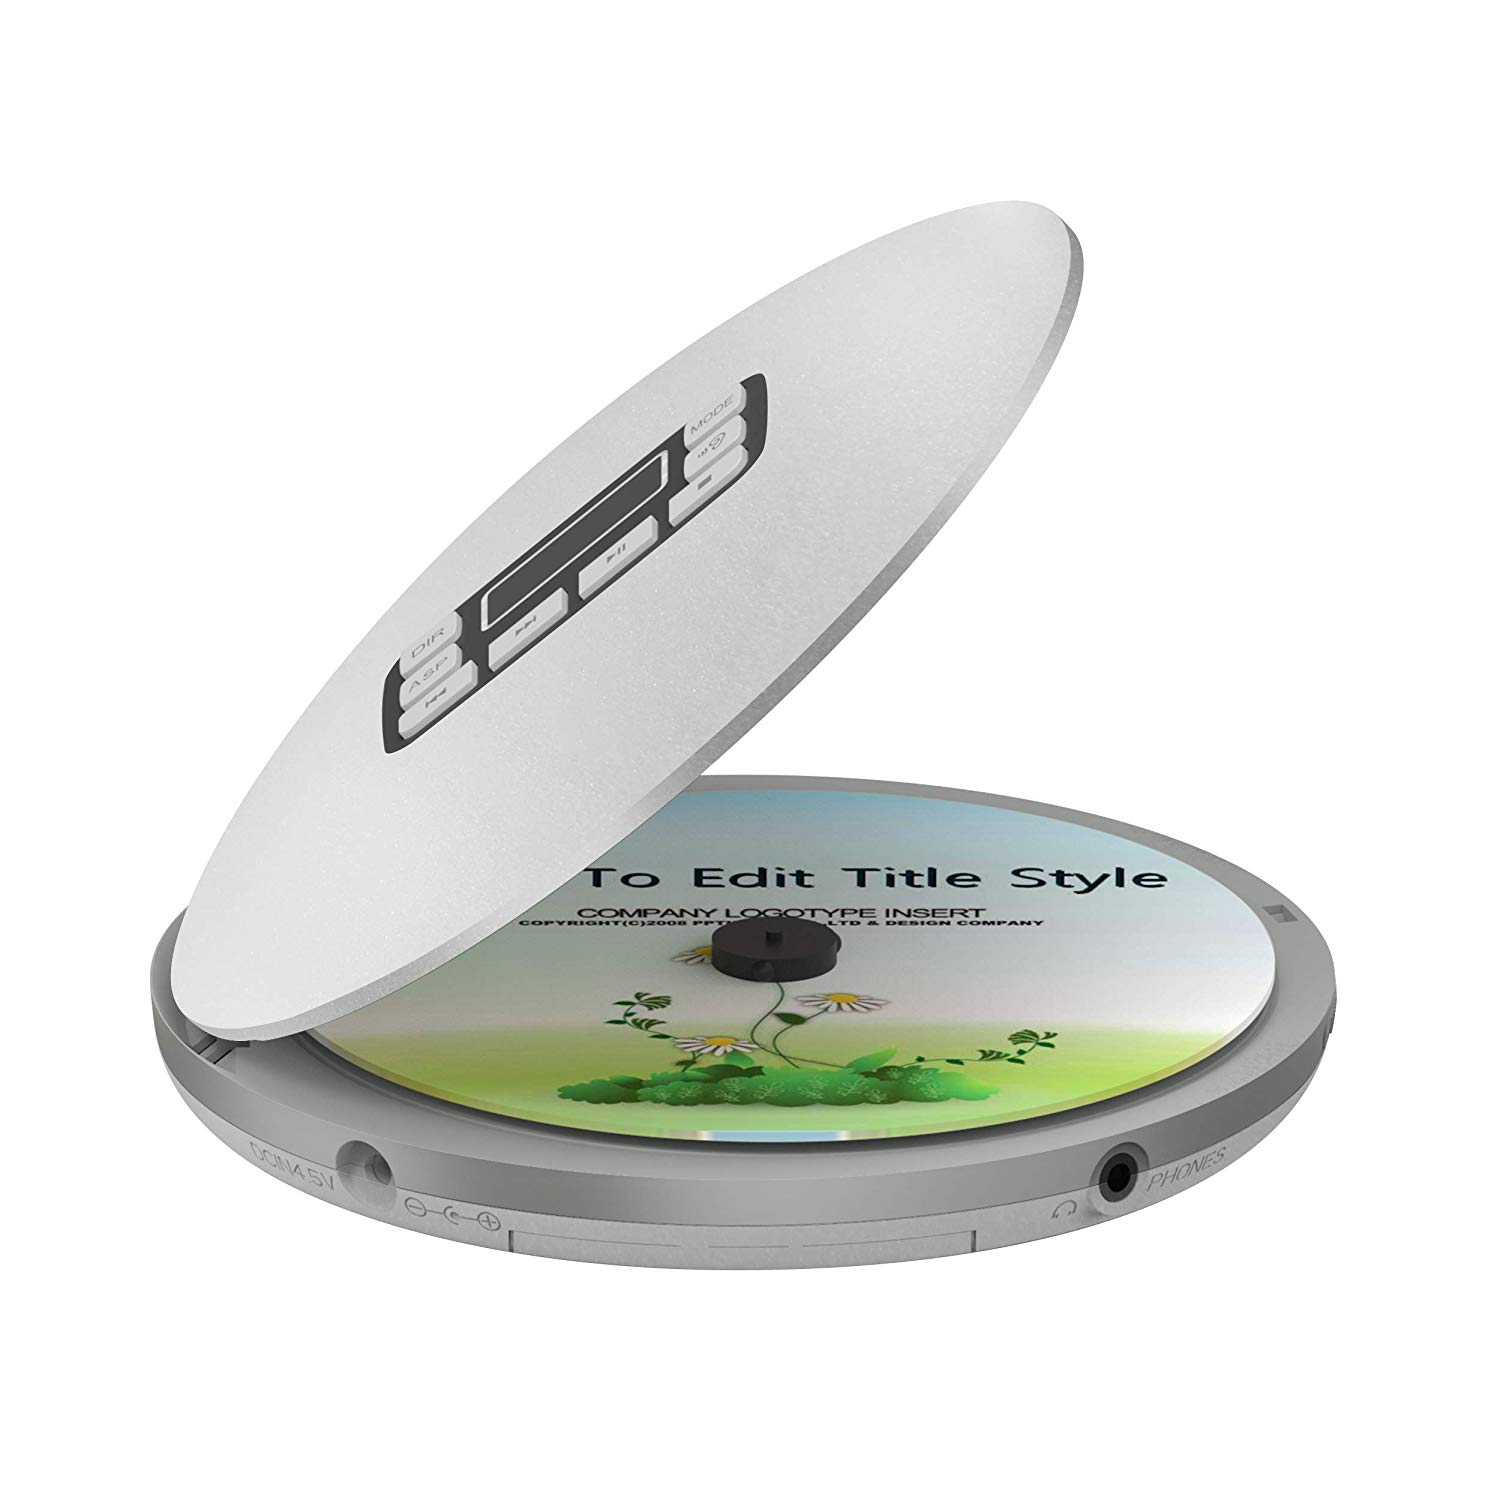 HOTT Portable CD Player CD611 Small Walkman CD Player with Stereo Headphones USB Cable LED Display Anti-Skip Anti-Shock Personal Compact Disc Music Player Silver - image 2 of 9